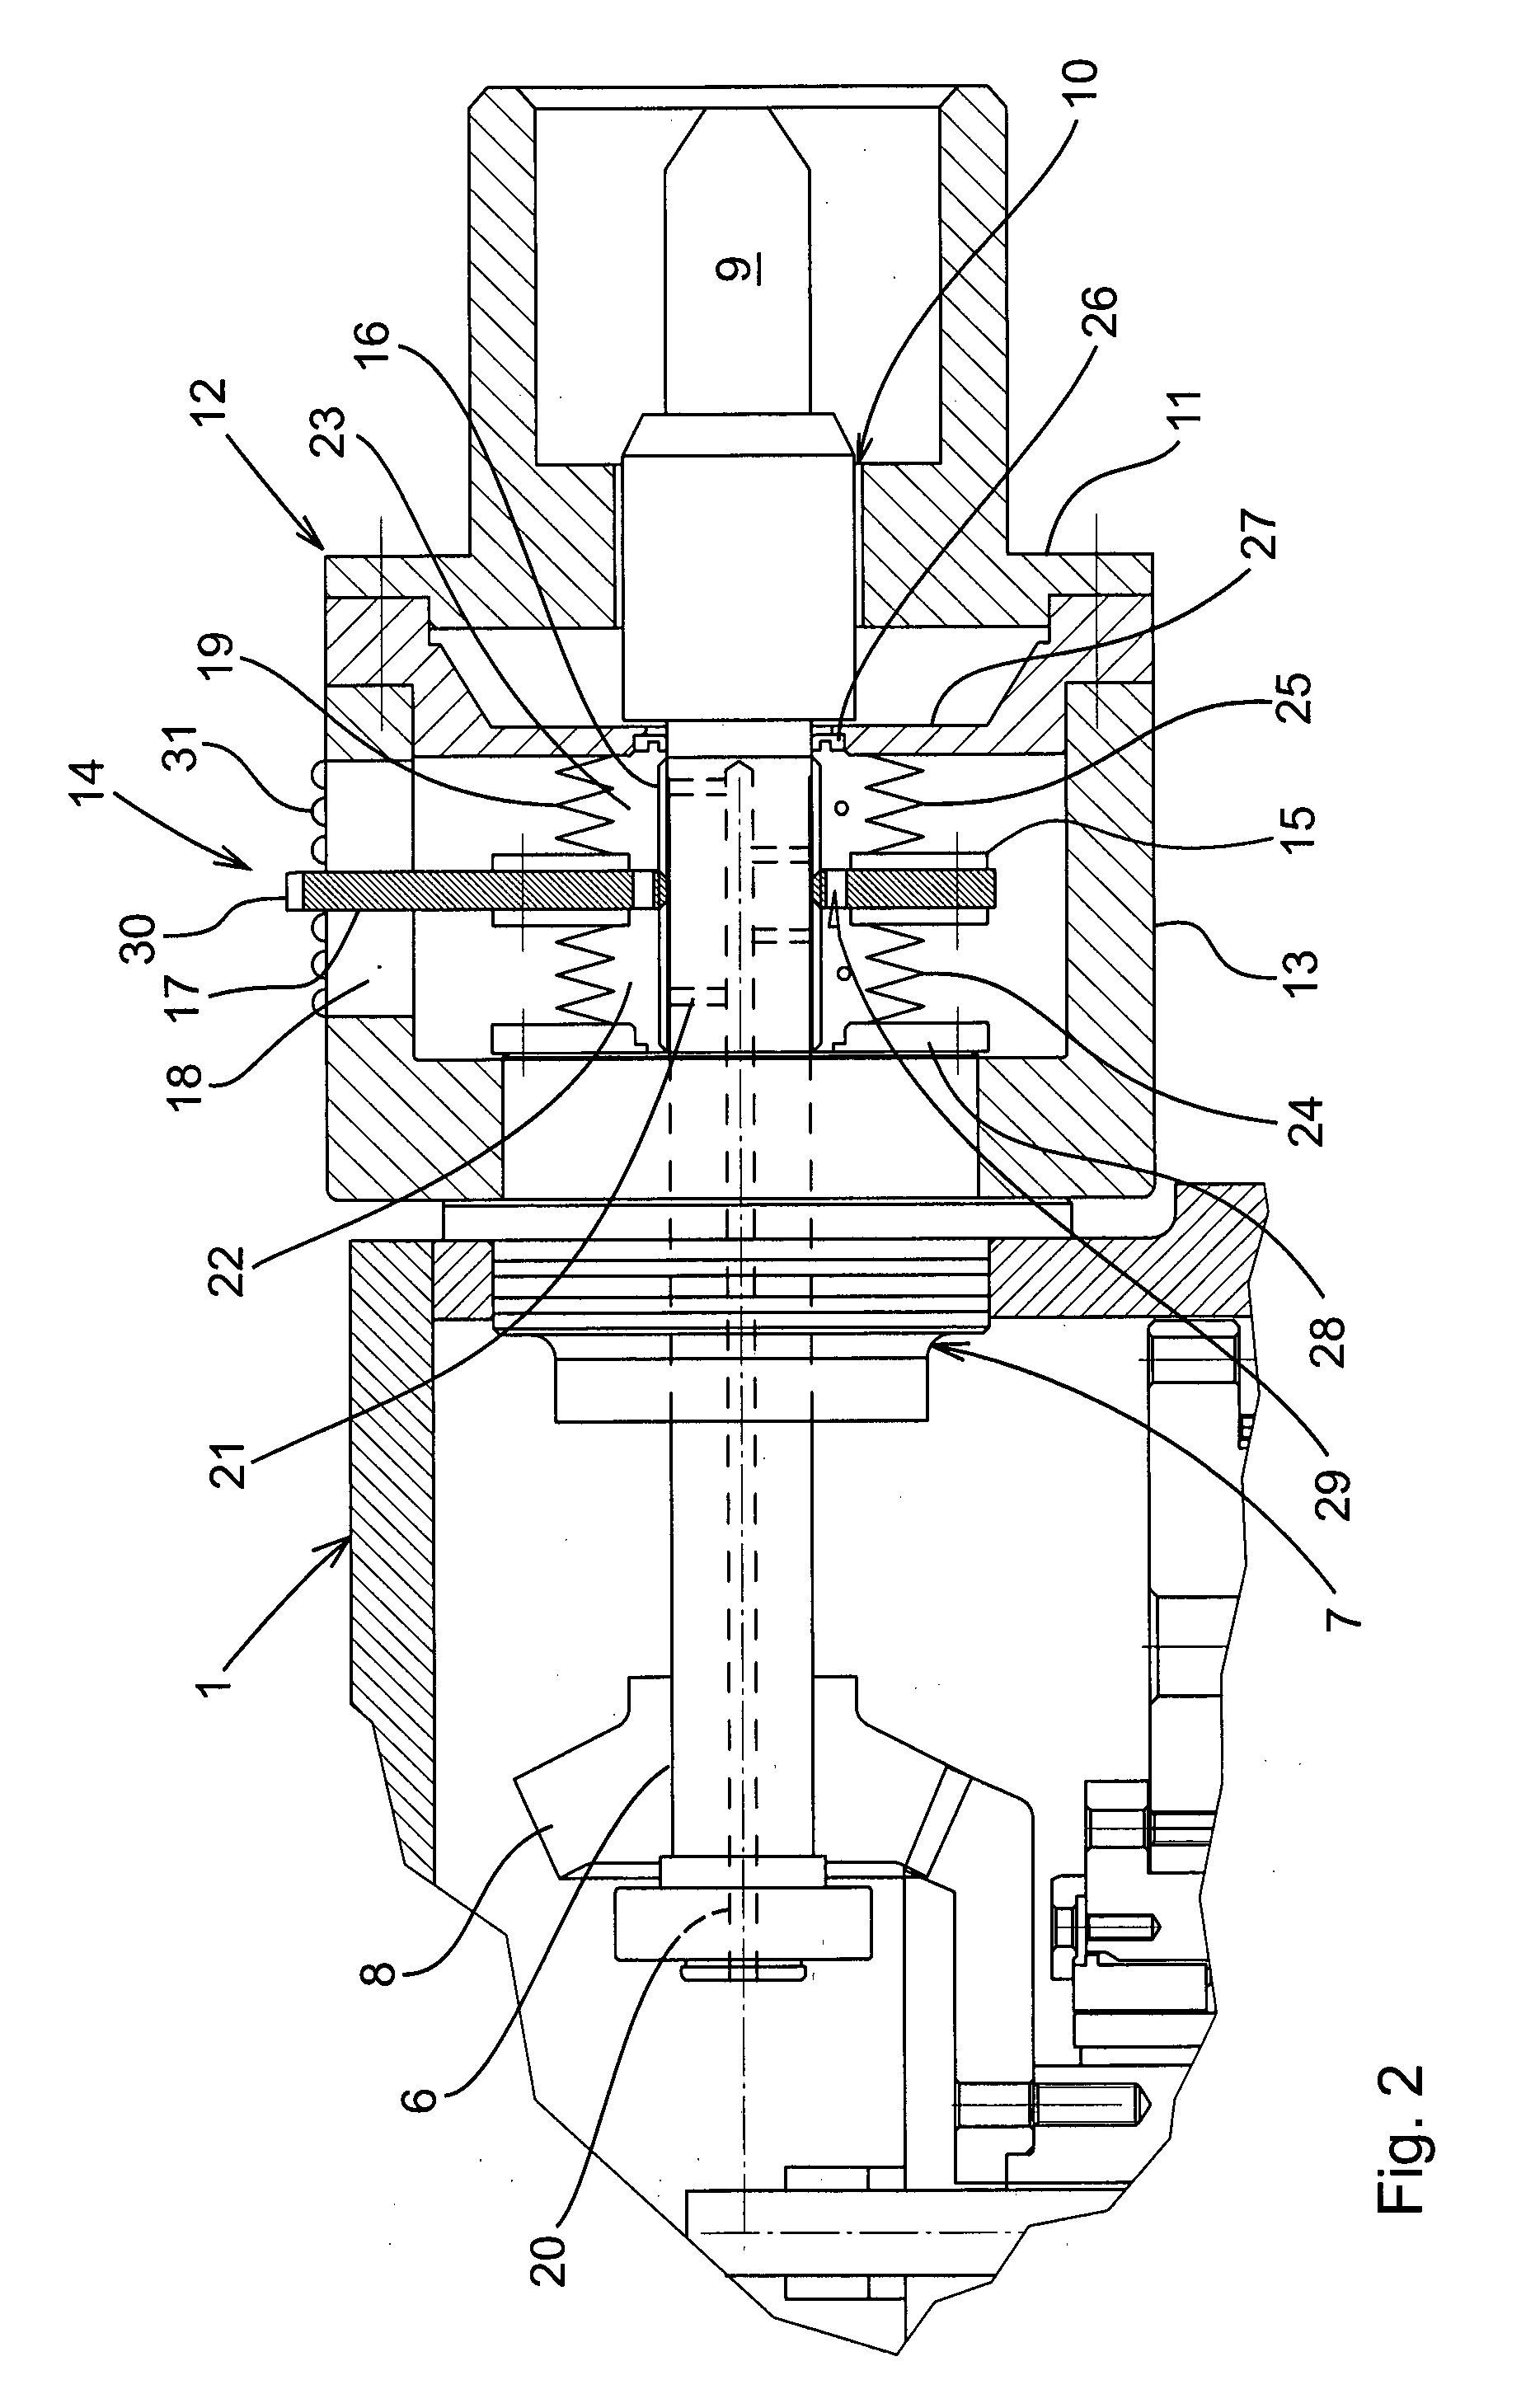 Subsea valve actuator having visual manual position indicator connected to a manual override shaft